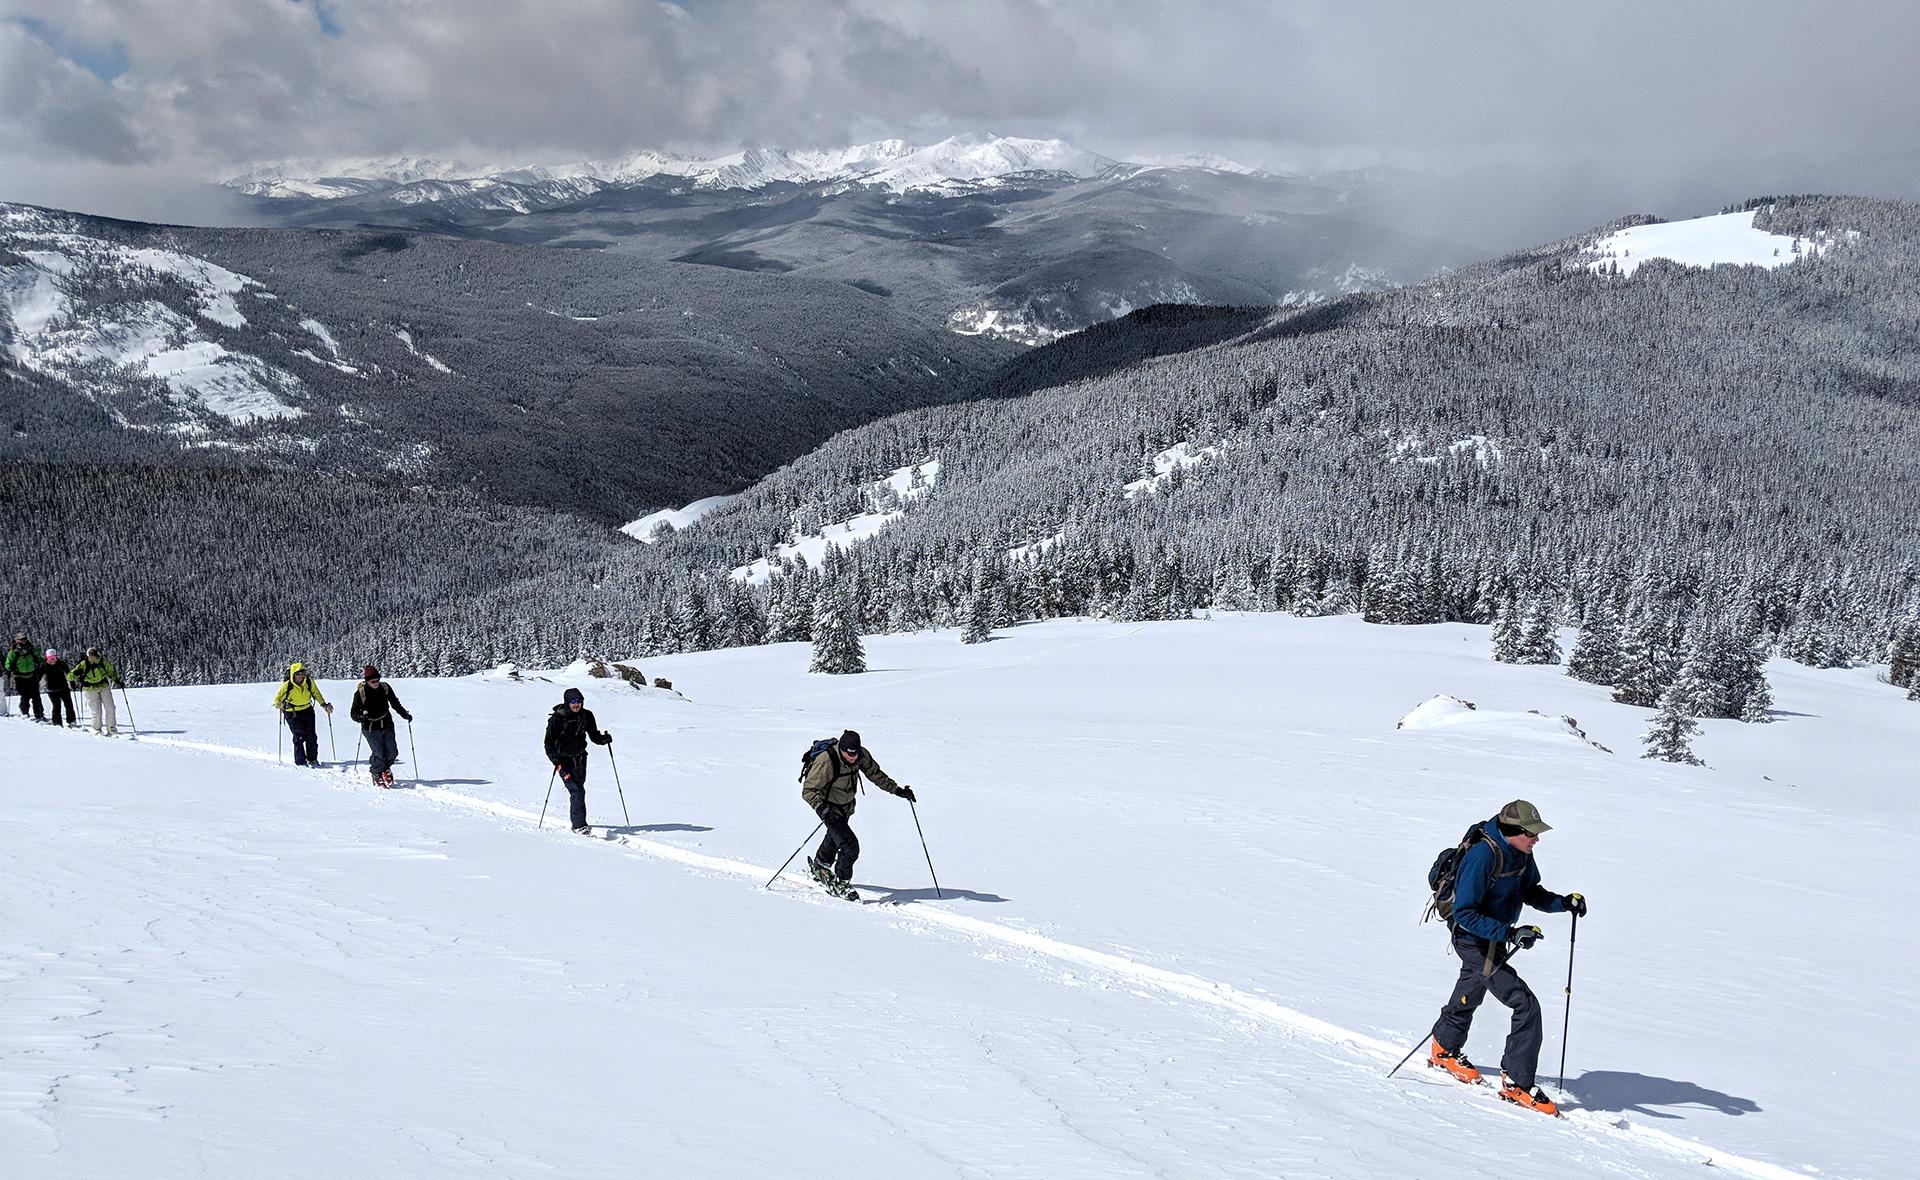 A line of cross-country skiiers trekking across a snow-covered plain with mountains in the background.